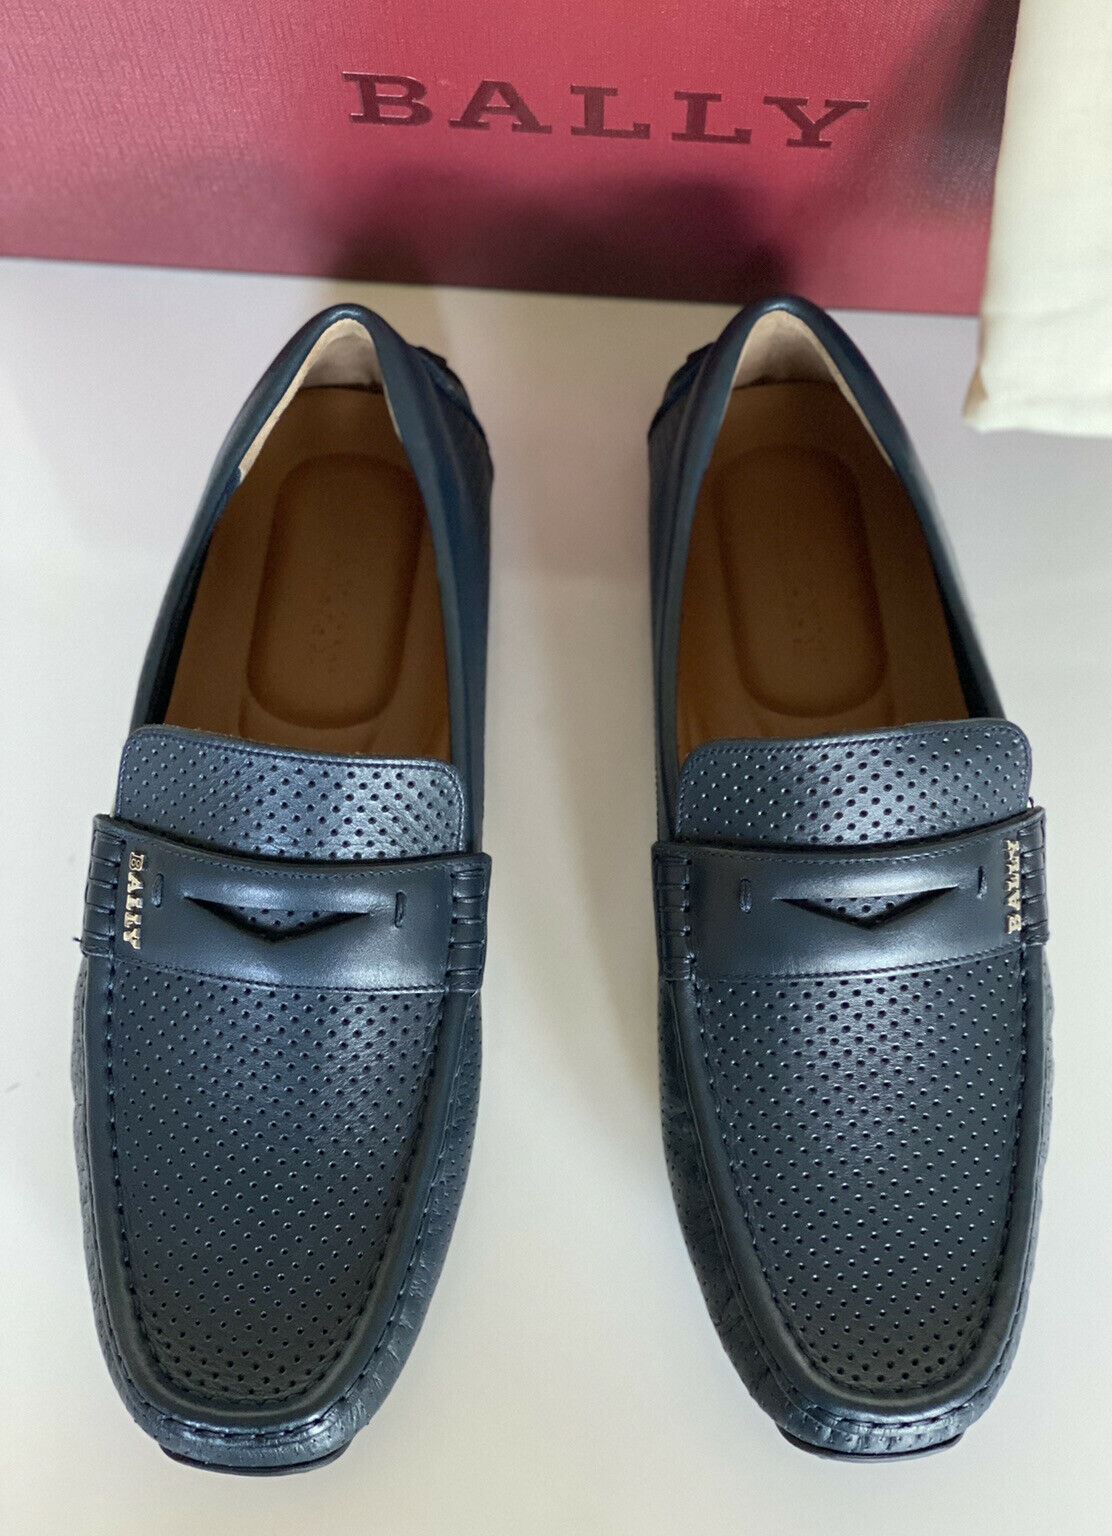 NIB Bally Mens  Perforated Calf Leather Driver Loafers Shoes  Blue 8 US 6231355